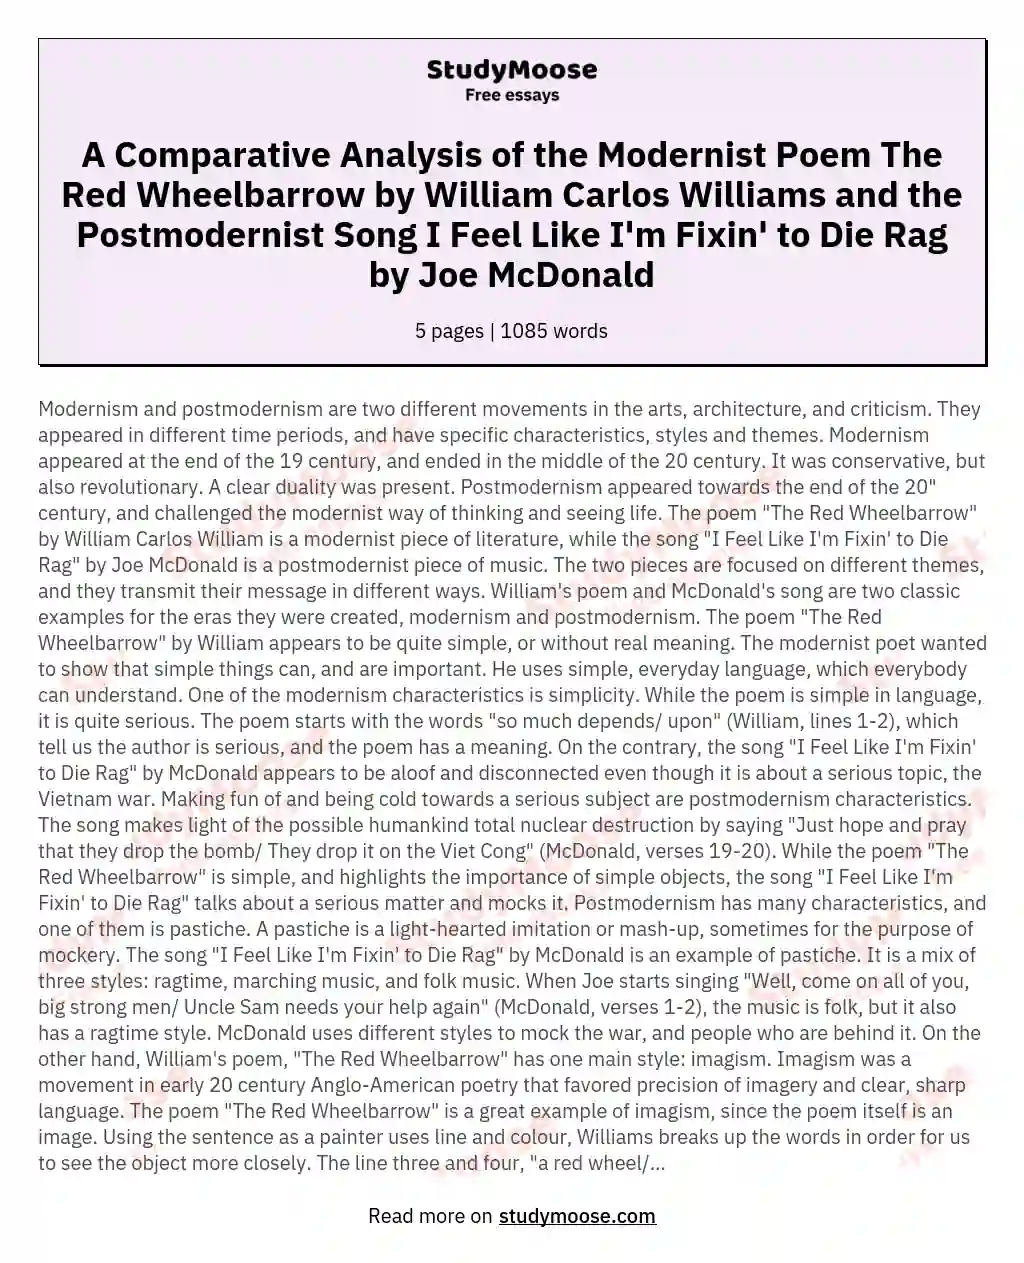 A Comparative Analysis of the Modernist Poem The Red Wheelbarrow by William Carlos Williams and the Postmodernist Song I Feel Like I'm Fixin' to Die Rag by Joe McDonald essay